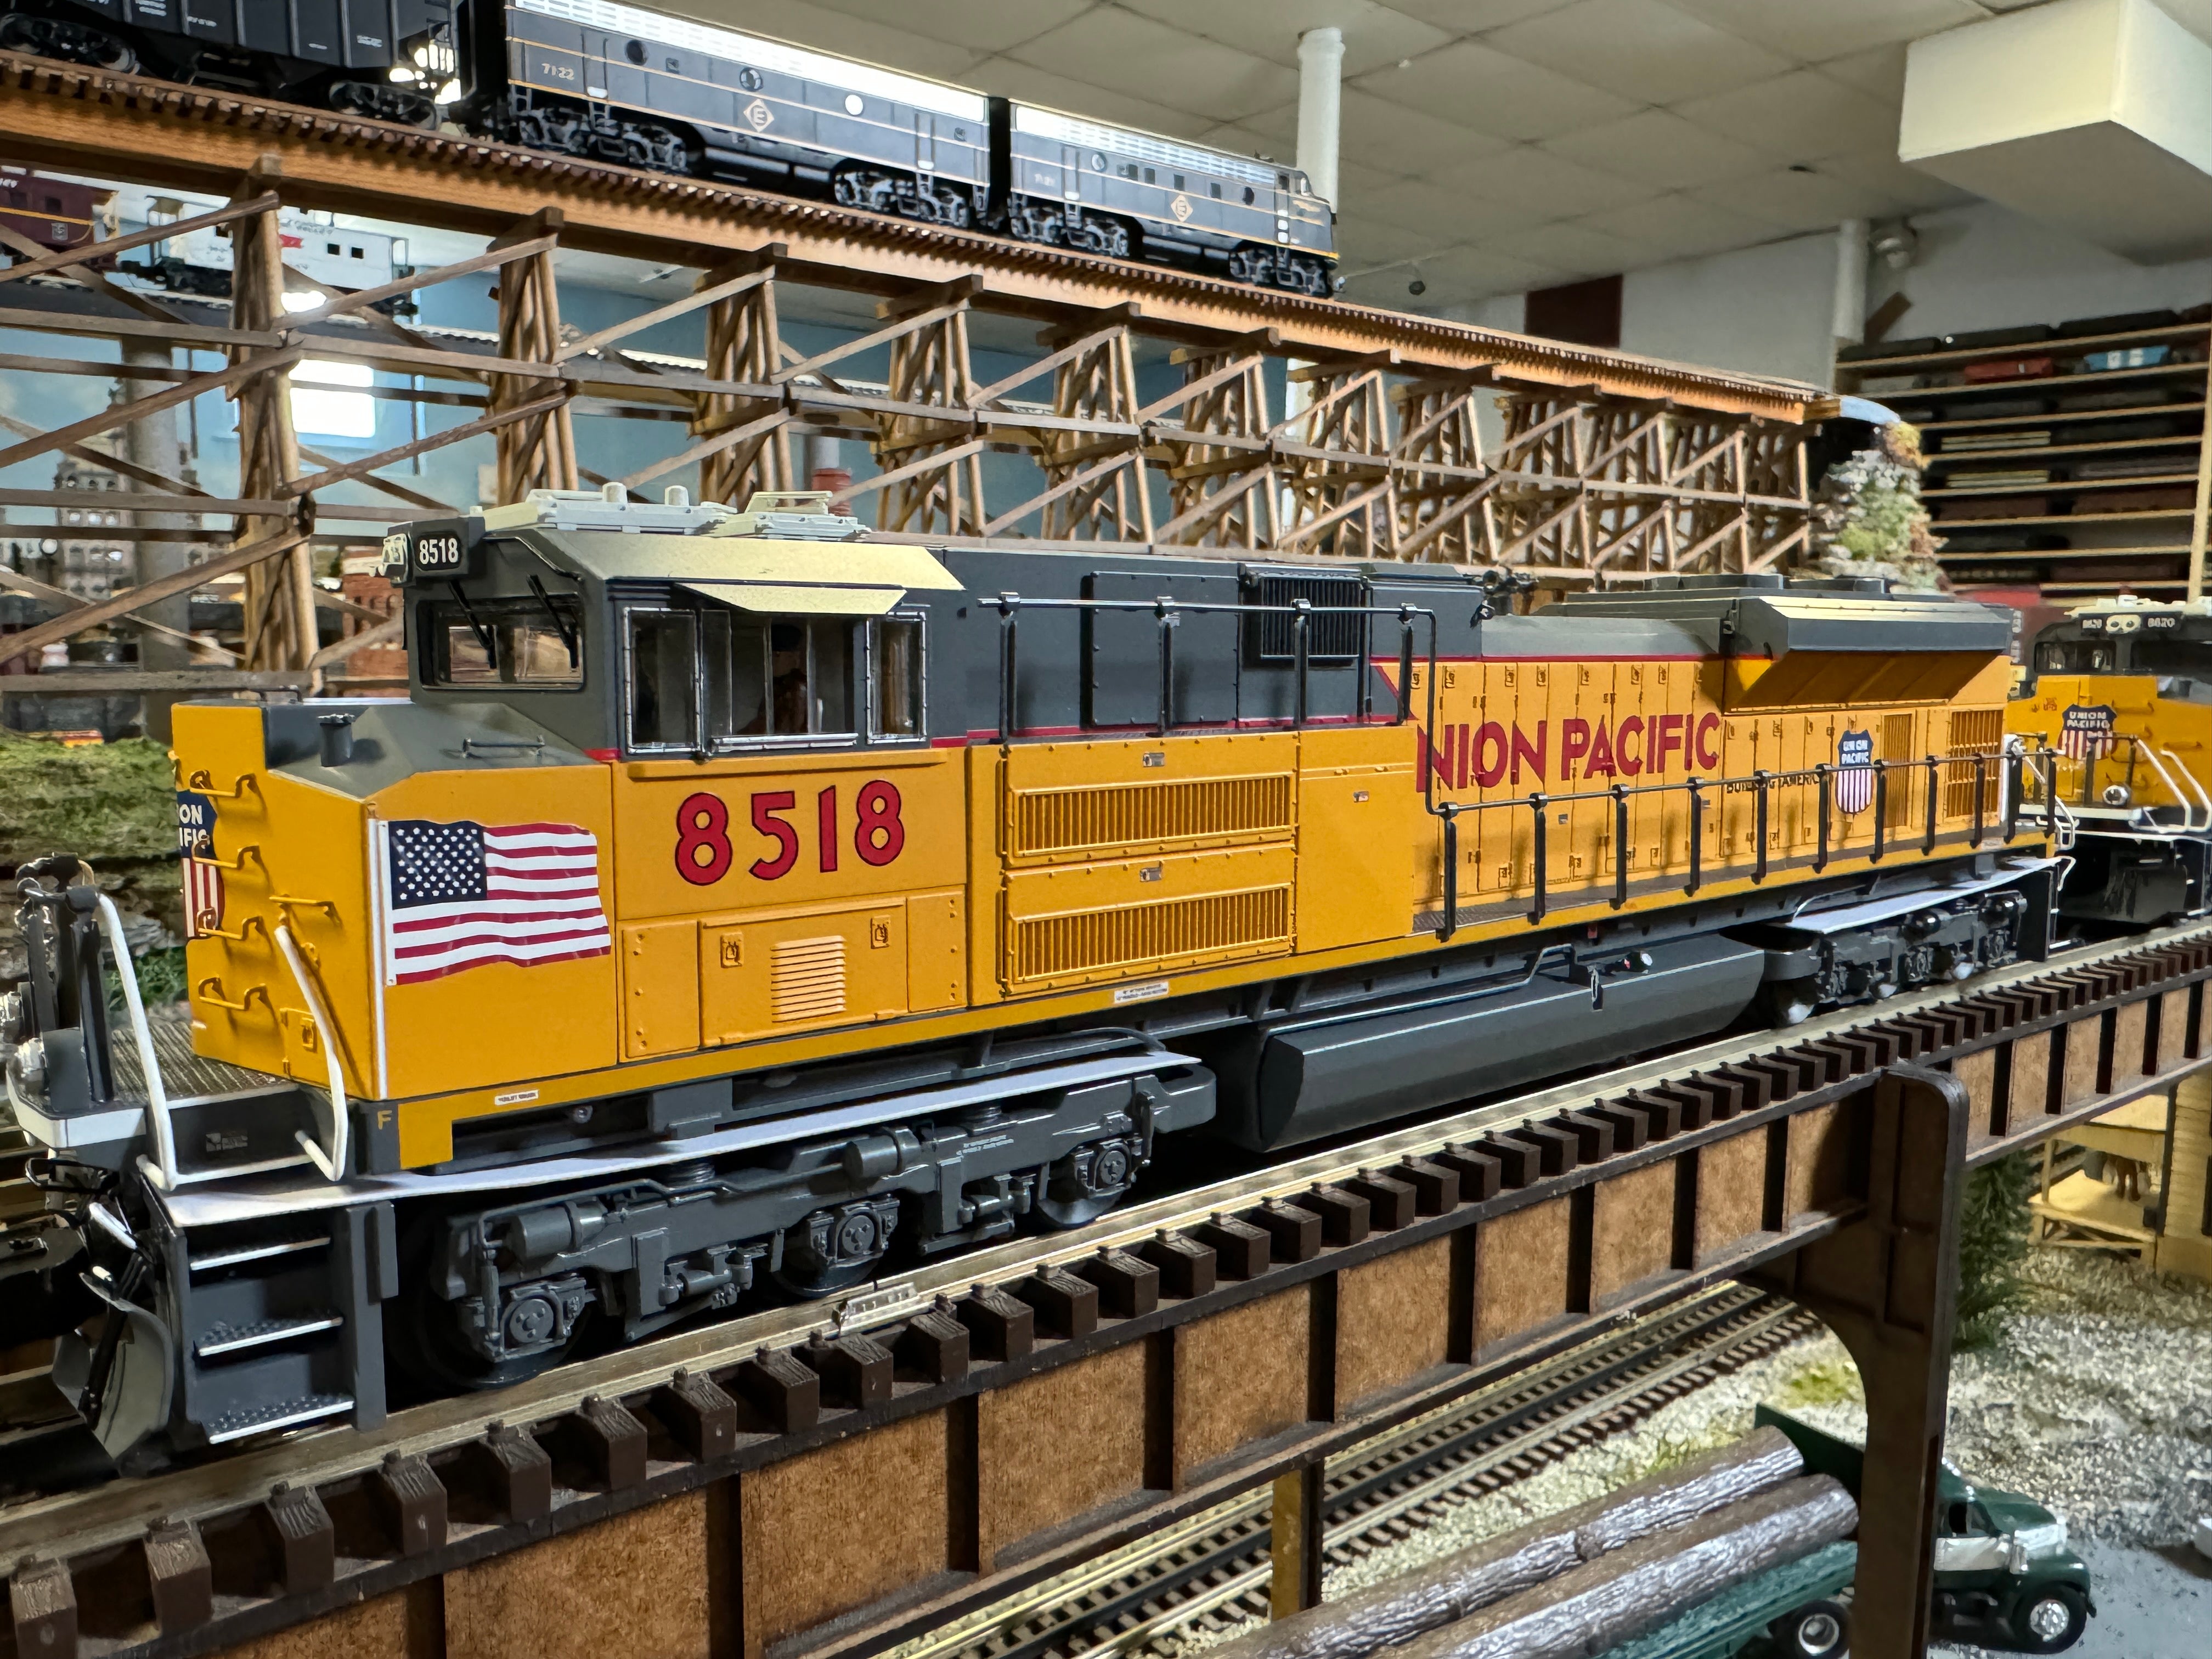 Lionel 2433031 - Legacy SD70ACE Diesel Engine "Union Pacific" #8518